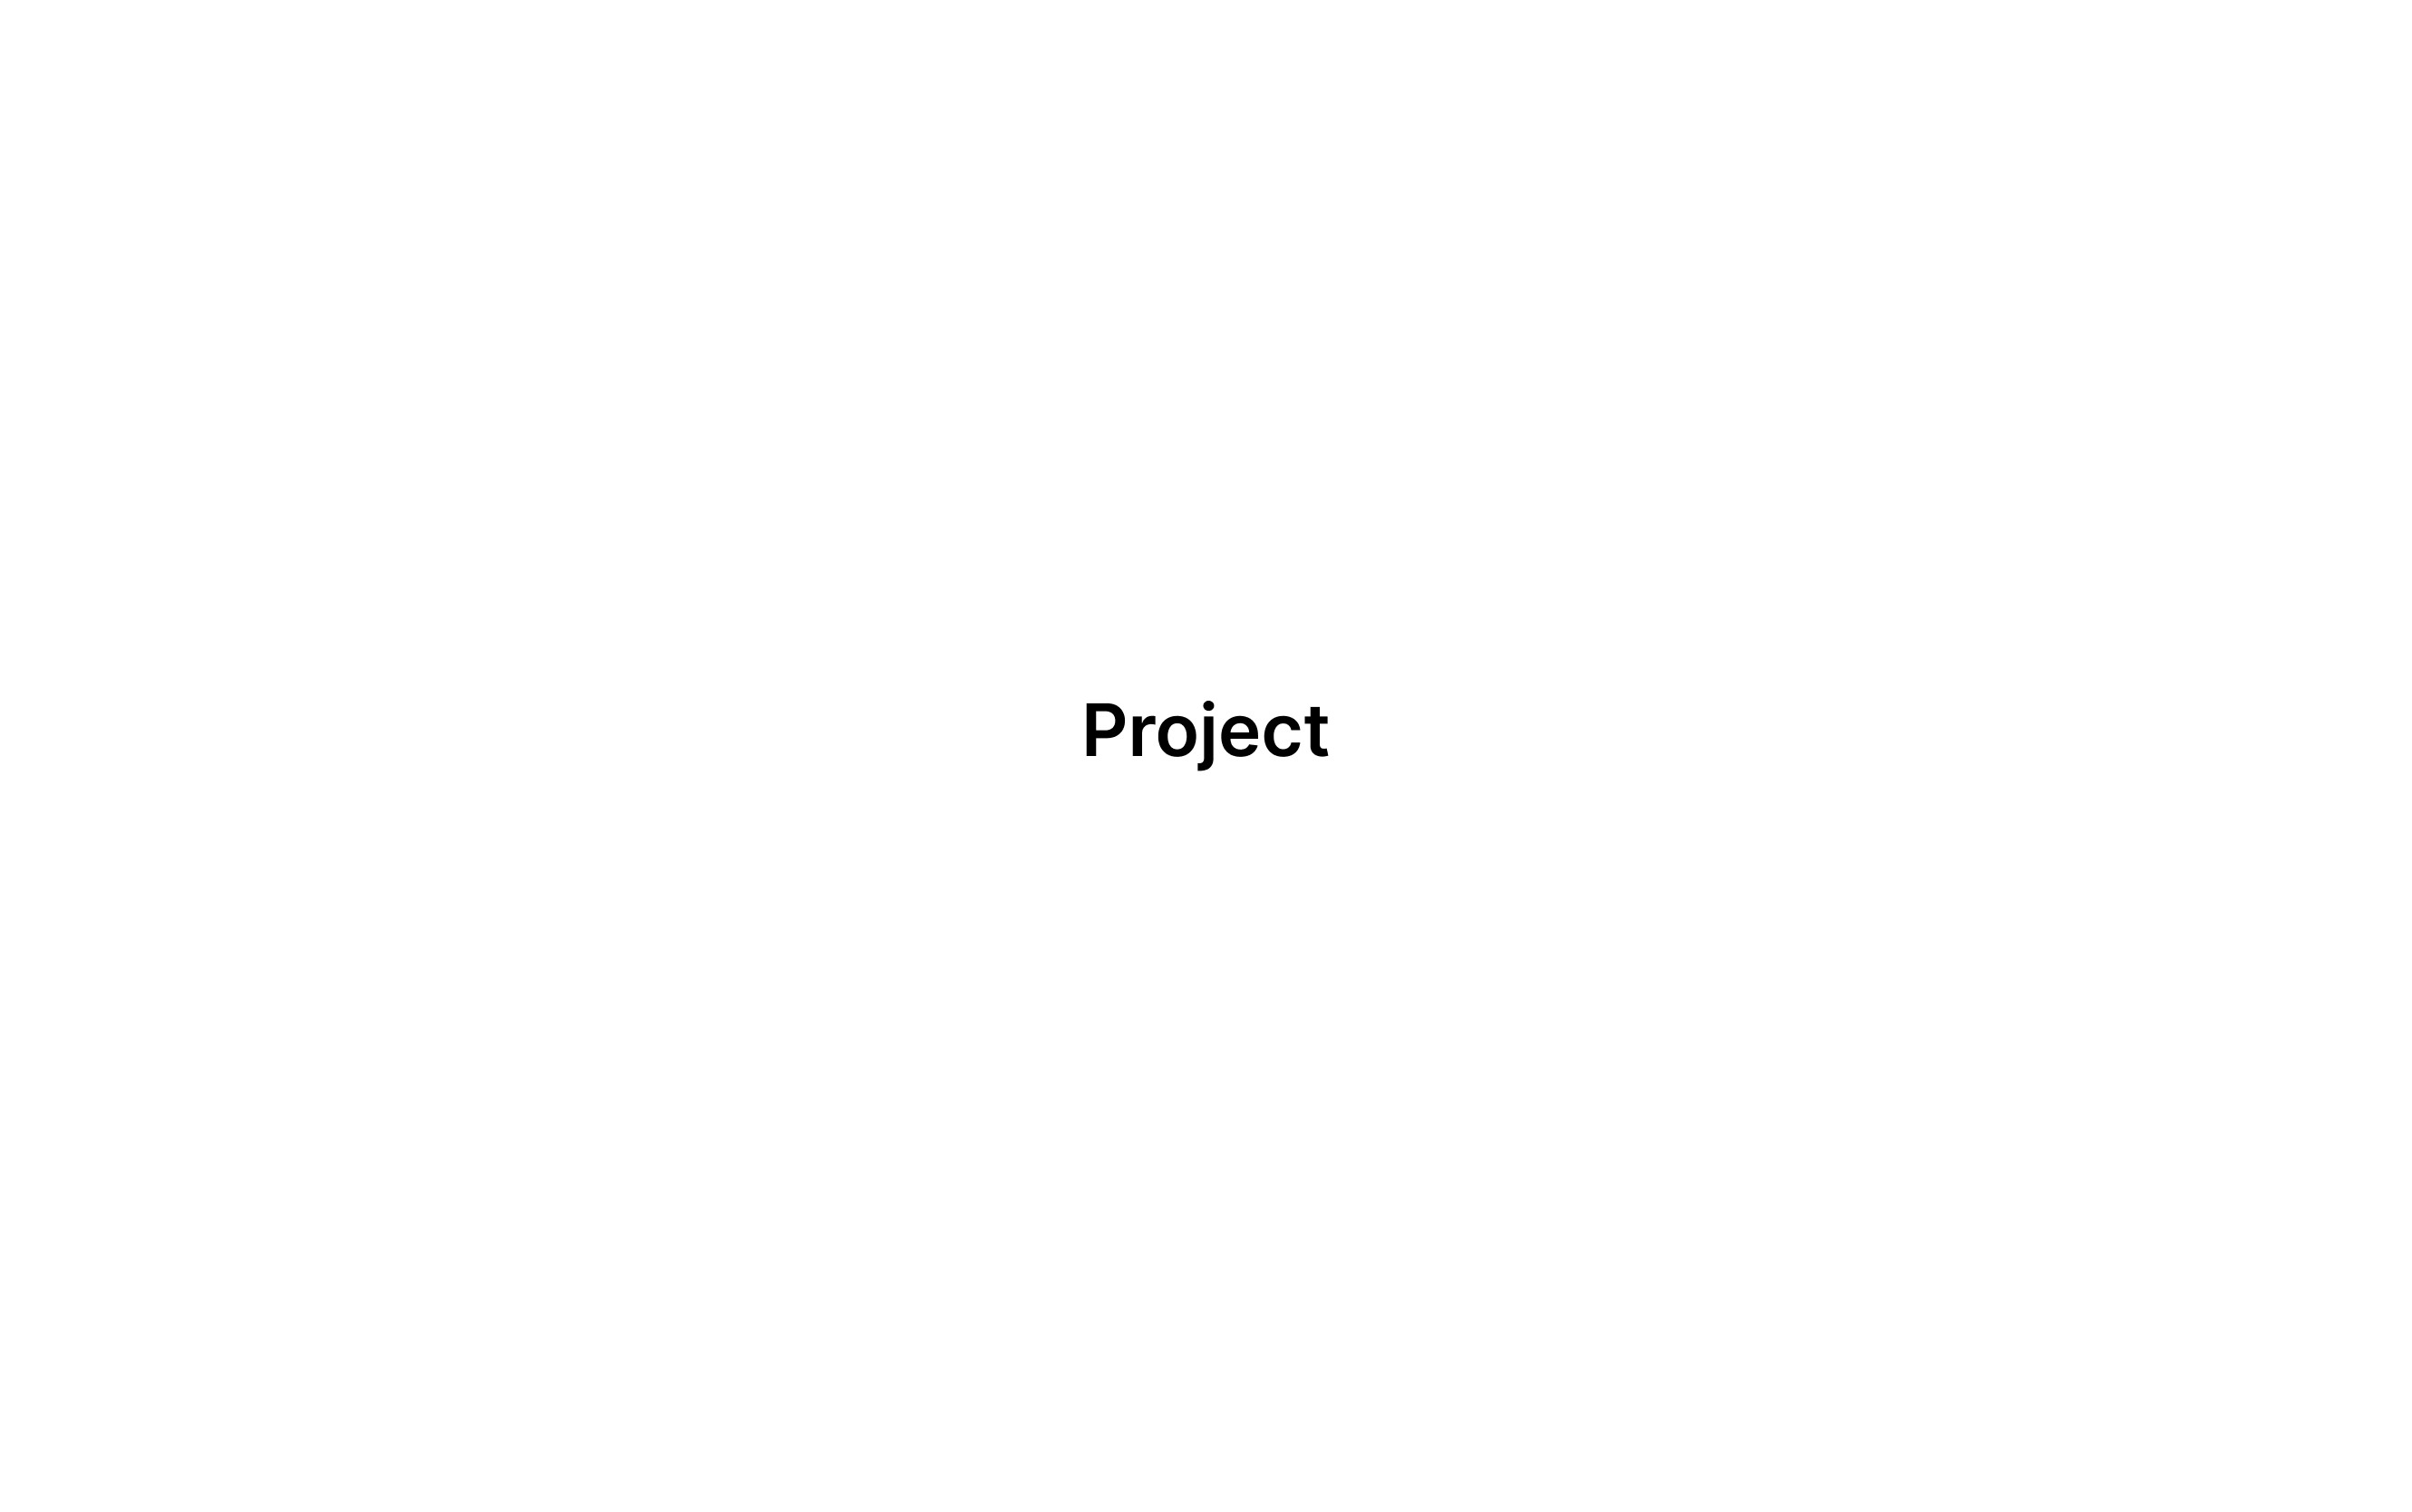 Project placeholder